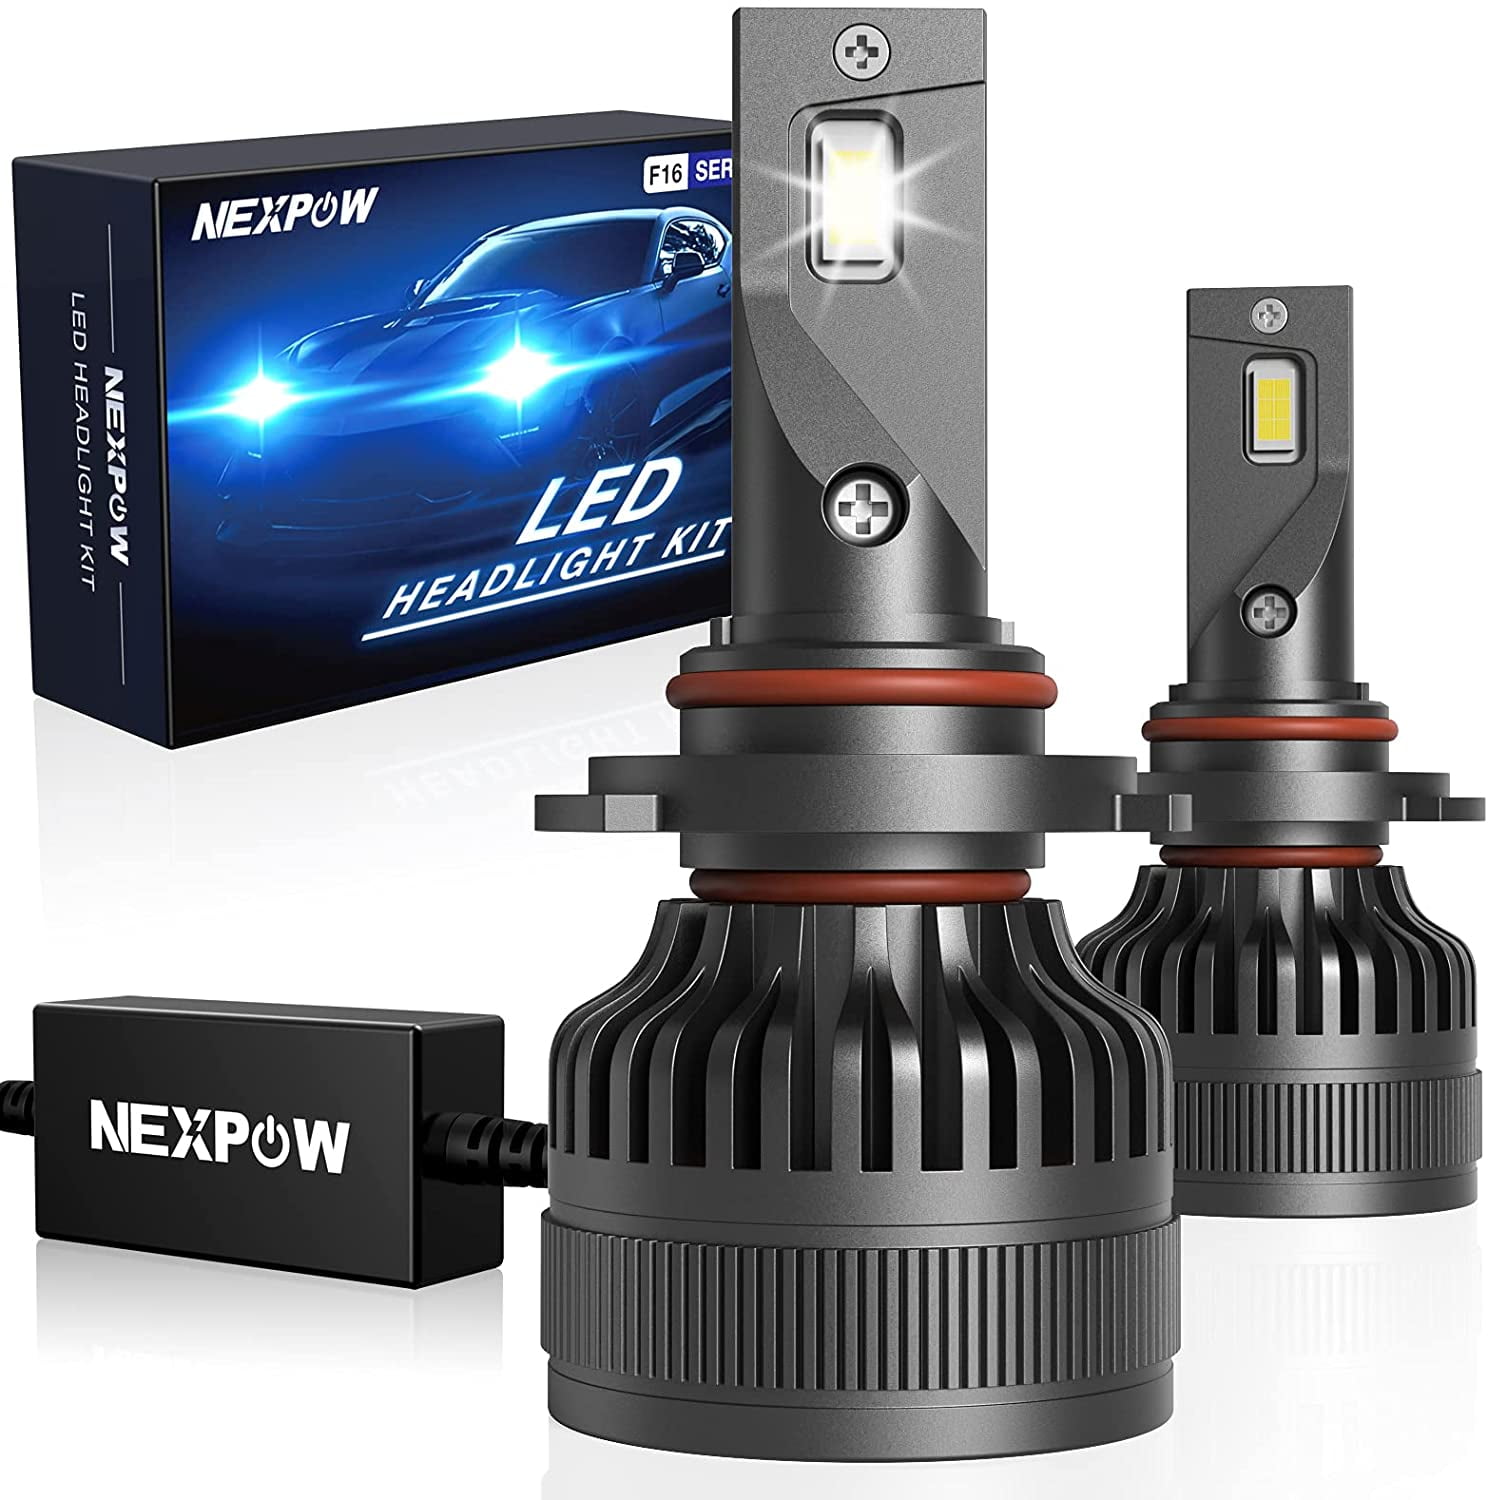 G5 LED Headlight 9006 HB4 with 80W 8000Lm/set Xenon White Super Bright by HIDNY 